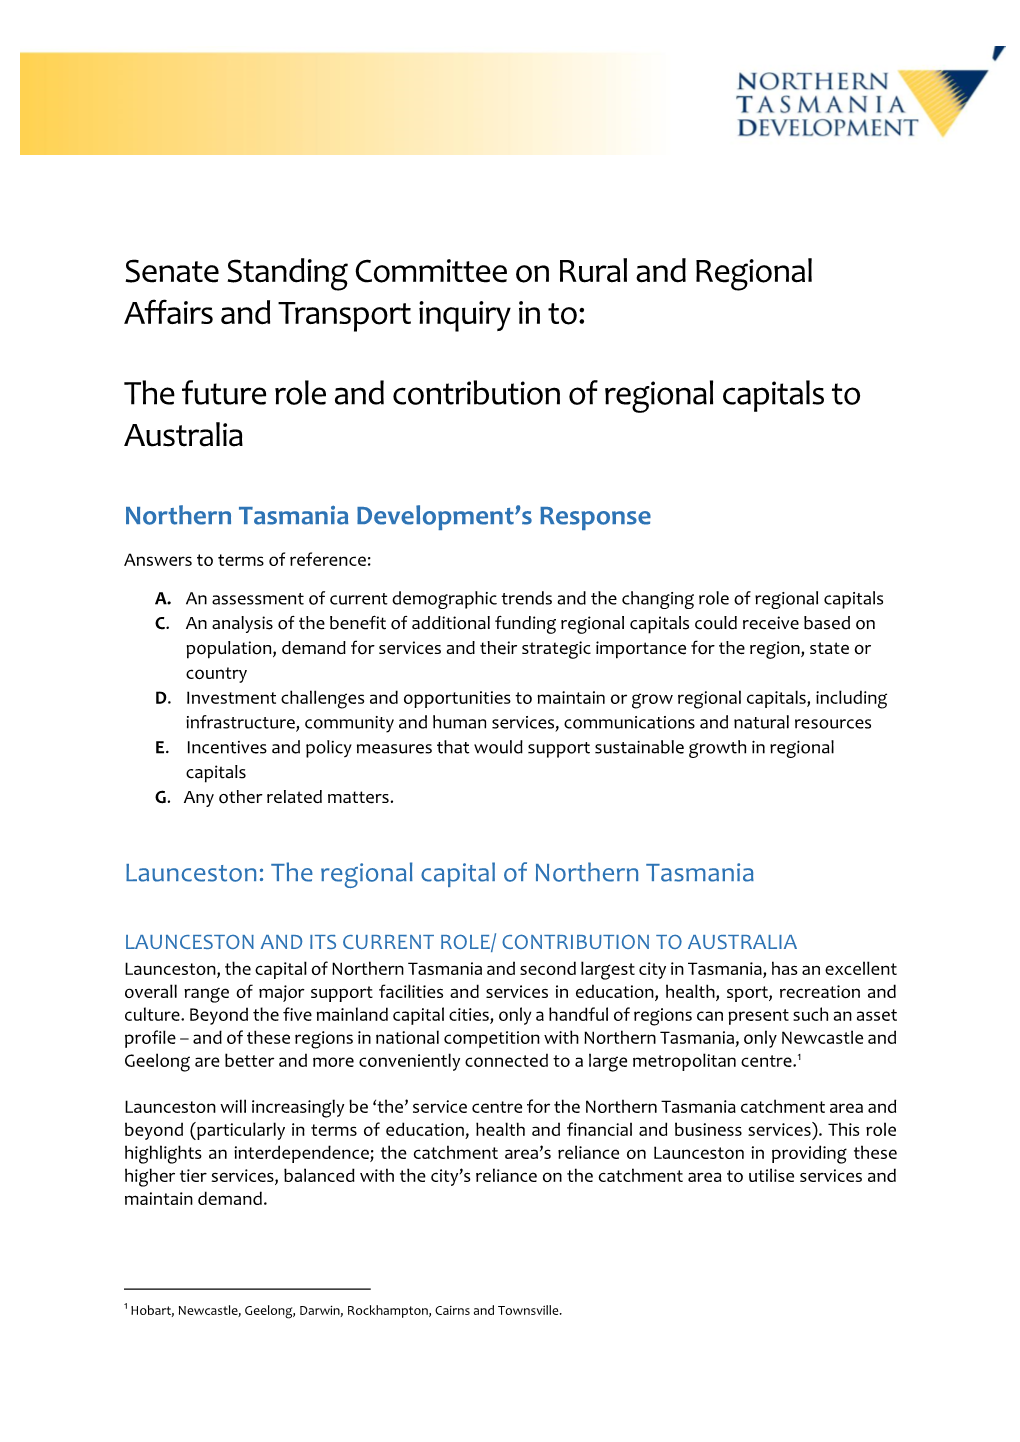 The Future Role and Contribution of Regional Capitals to Australia